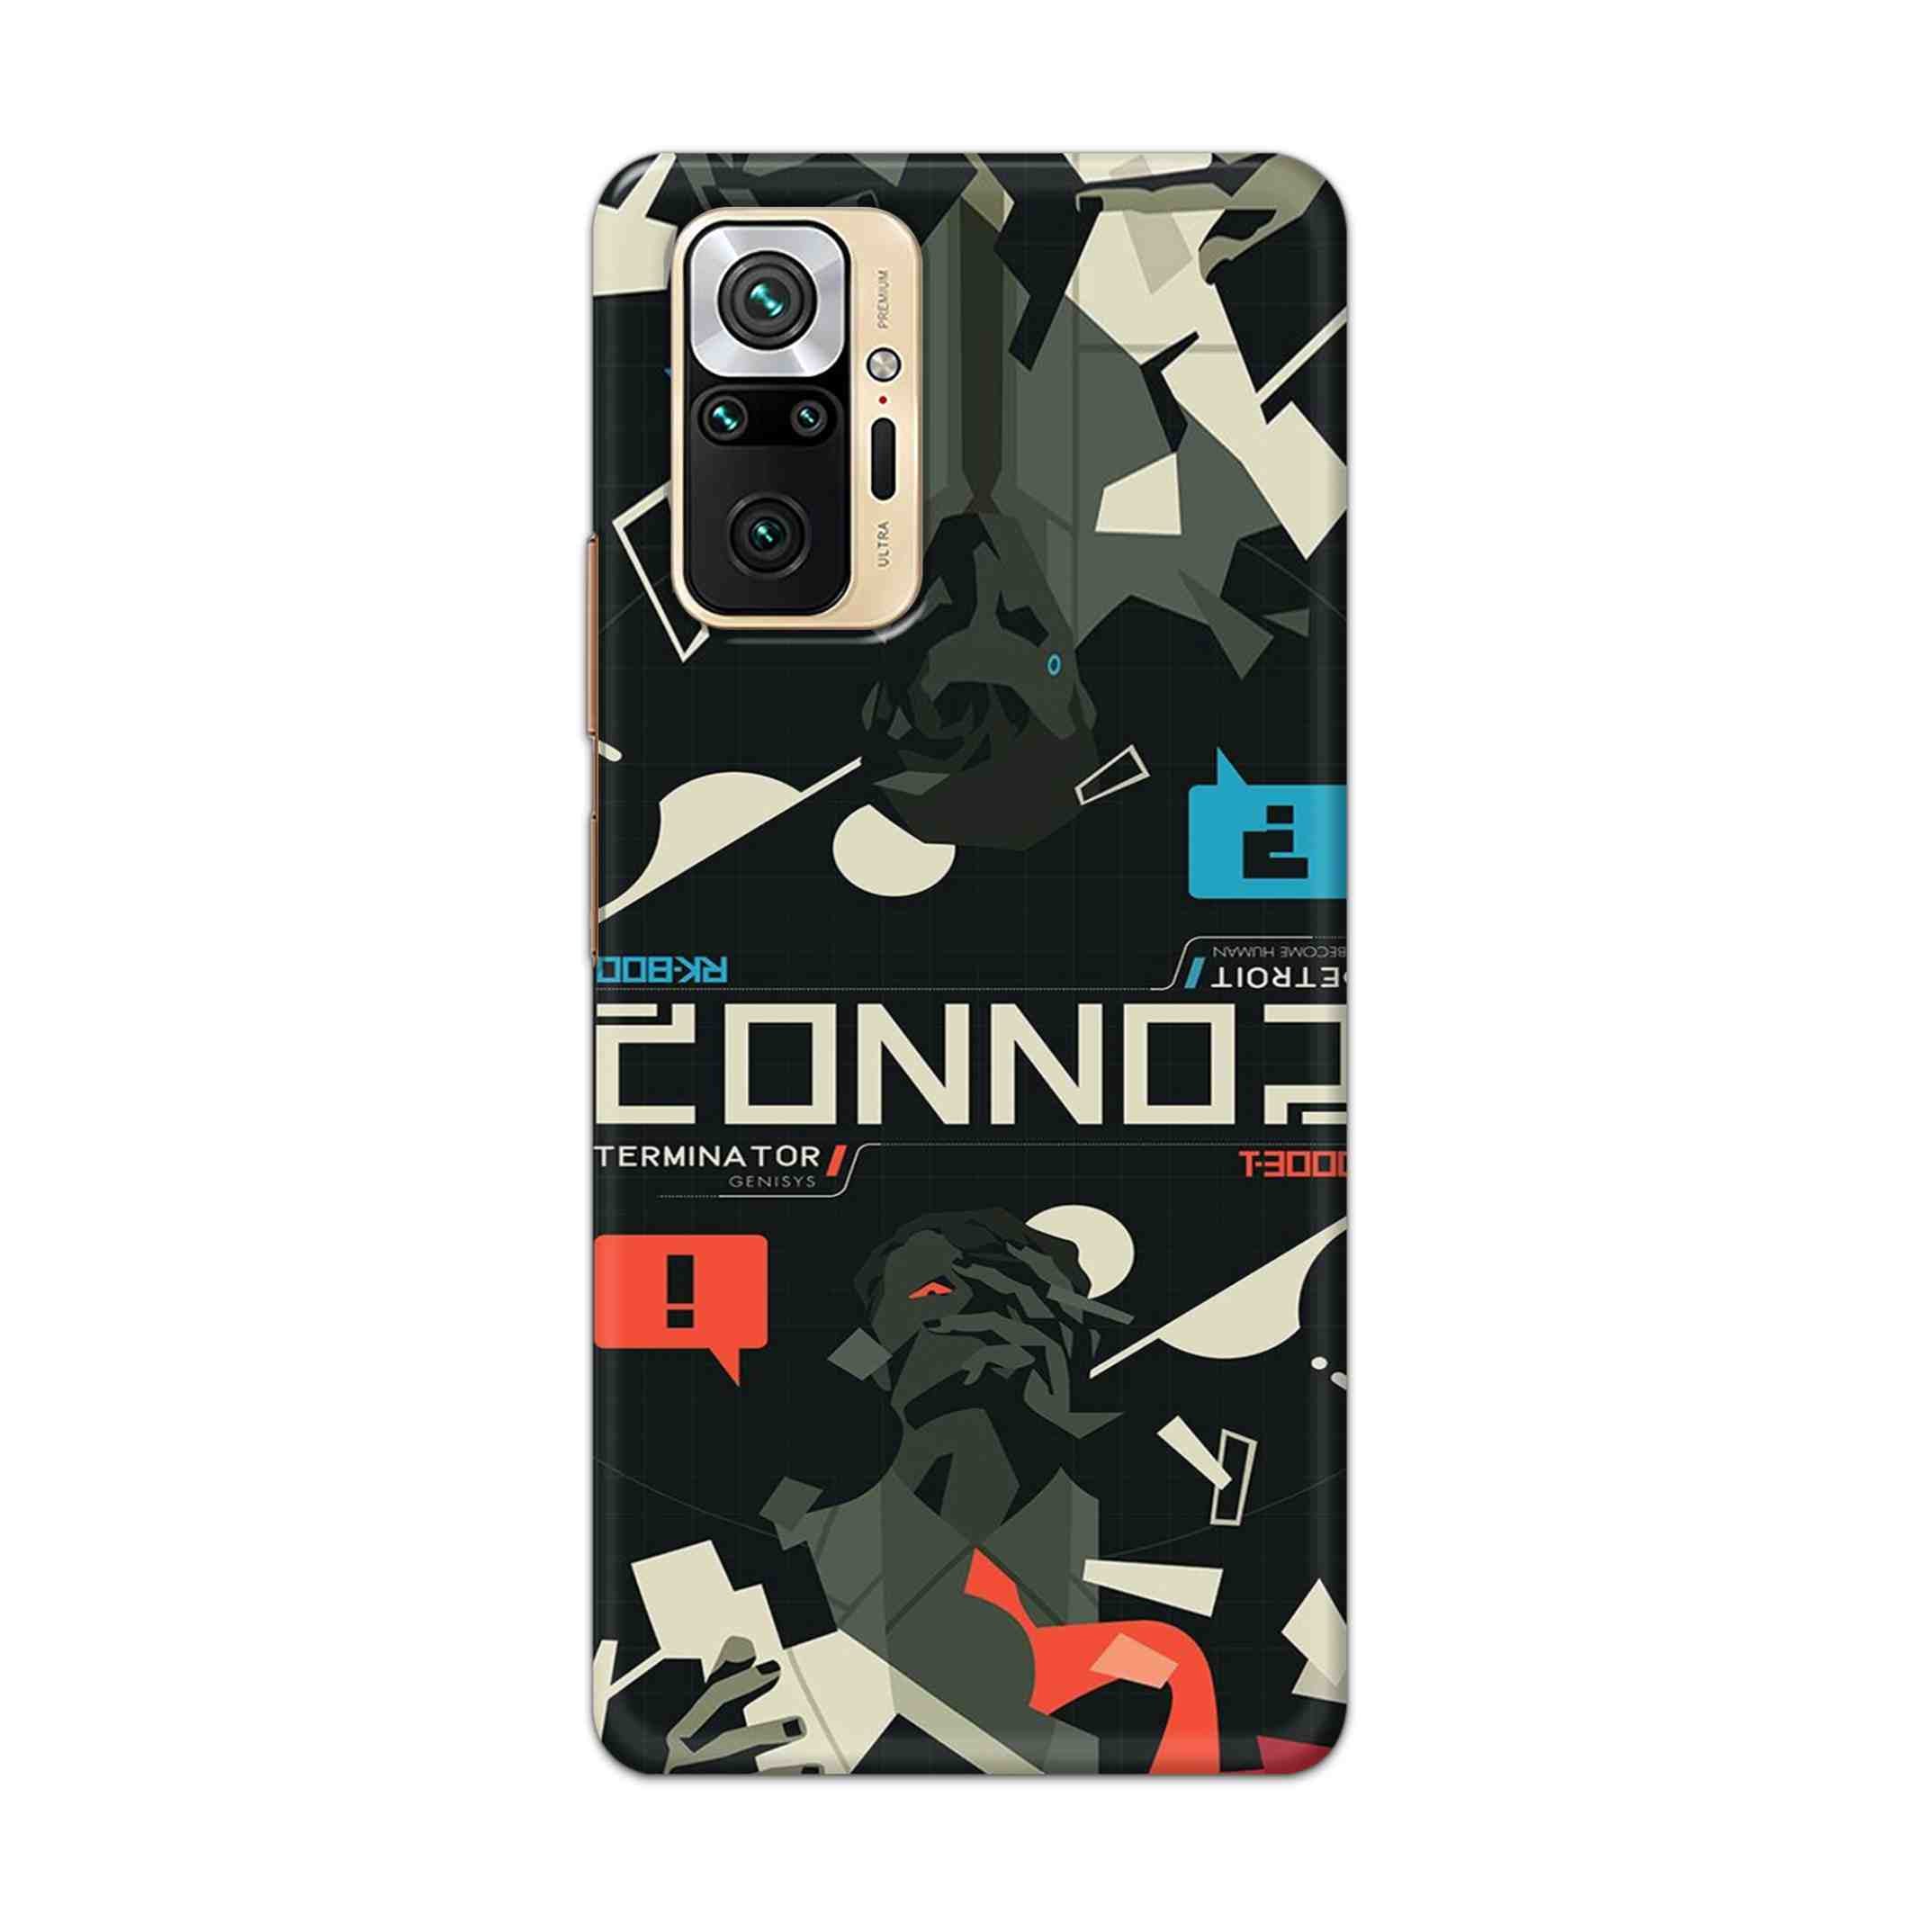 Buy Terminator Hard Back Mobile Phone Case Cover For Redmi Note 10 Pro Max Online